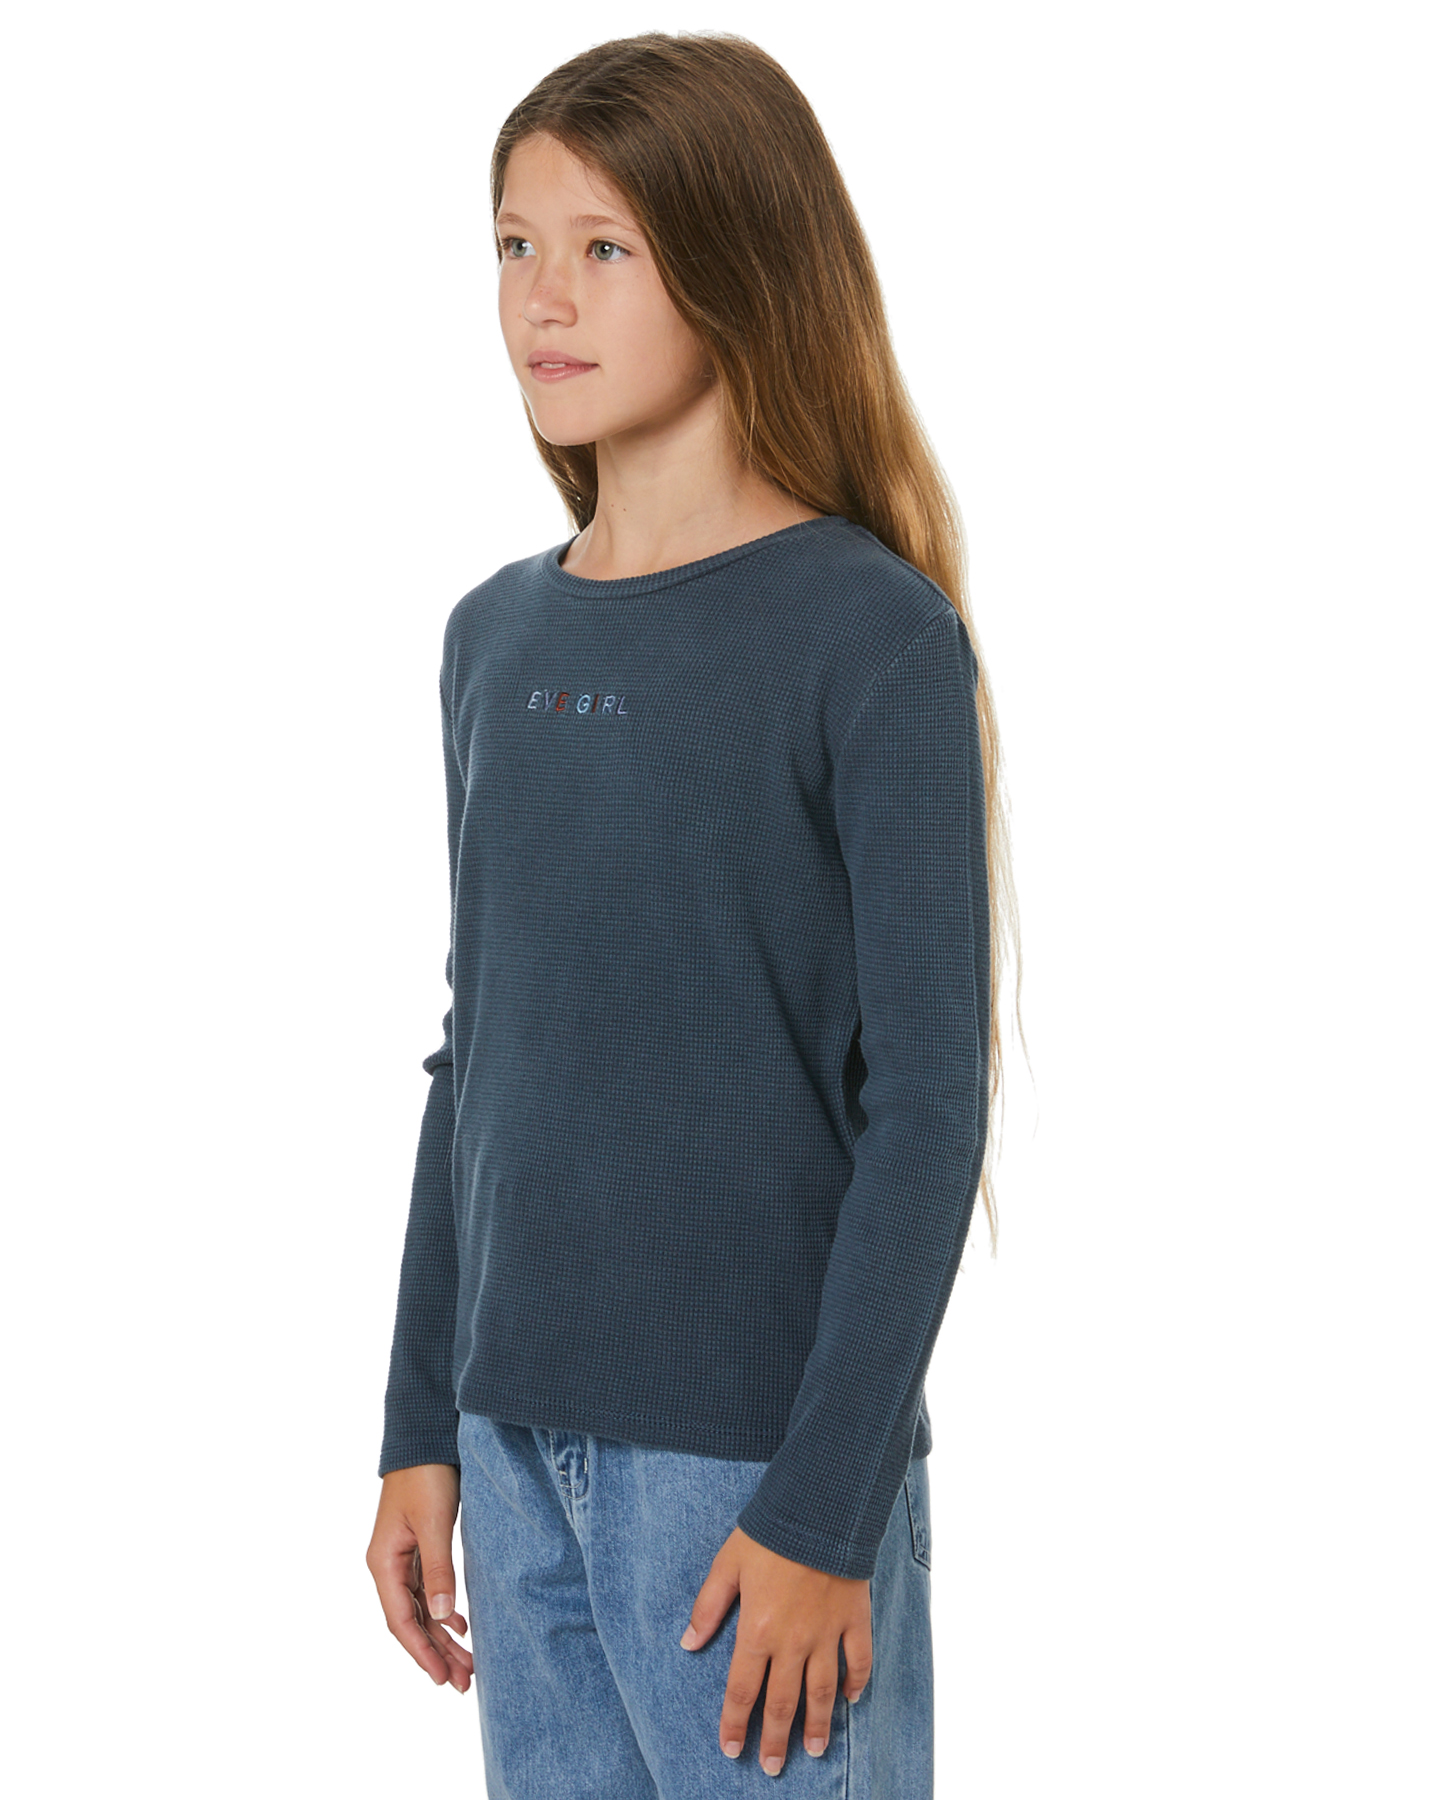 Eves Sister Girls Eve Girl Waffle Tee - Teen - Navy | SurfStitch